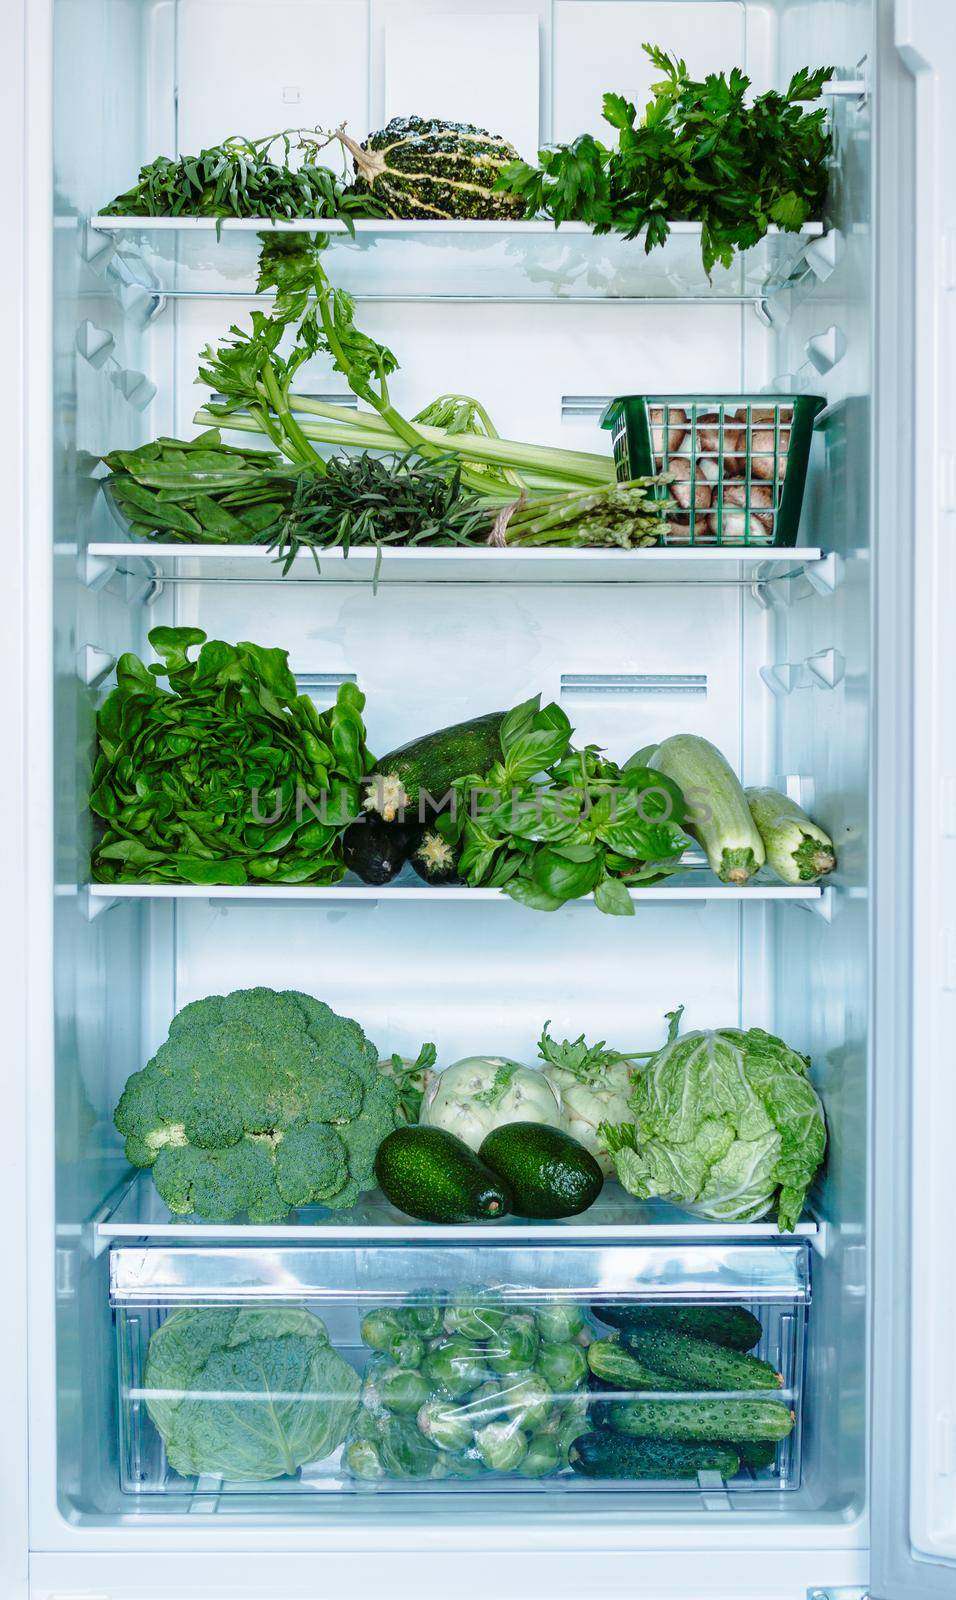 Fresh green vegetables in household refrigerator. Open full refrigerator with selected green vegetables and greens. Vertical shot of cabbages, zucchini, basil, avocado and cucumbers. Vegetarian food